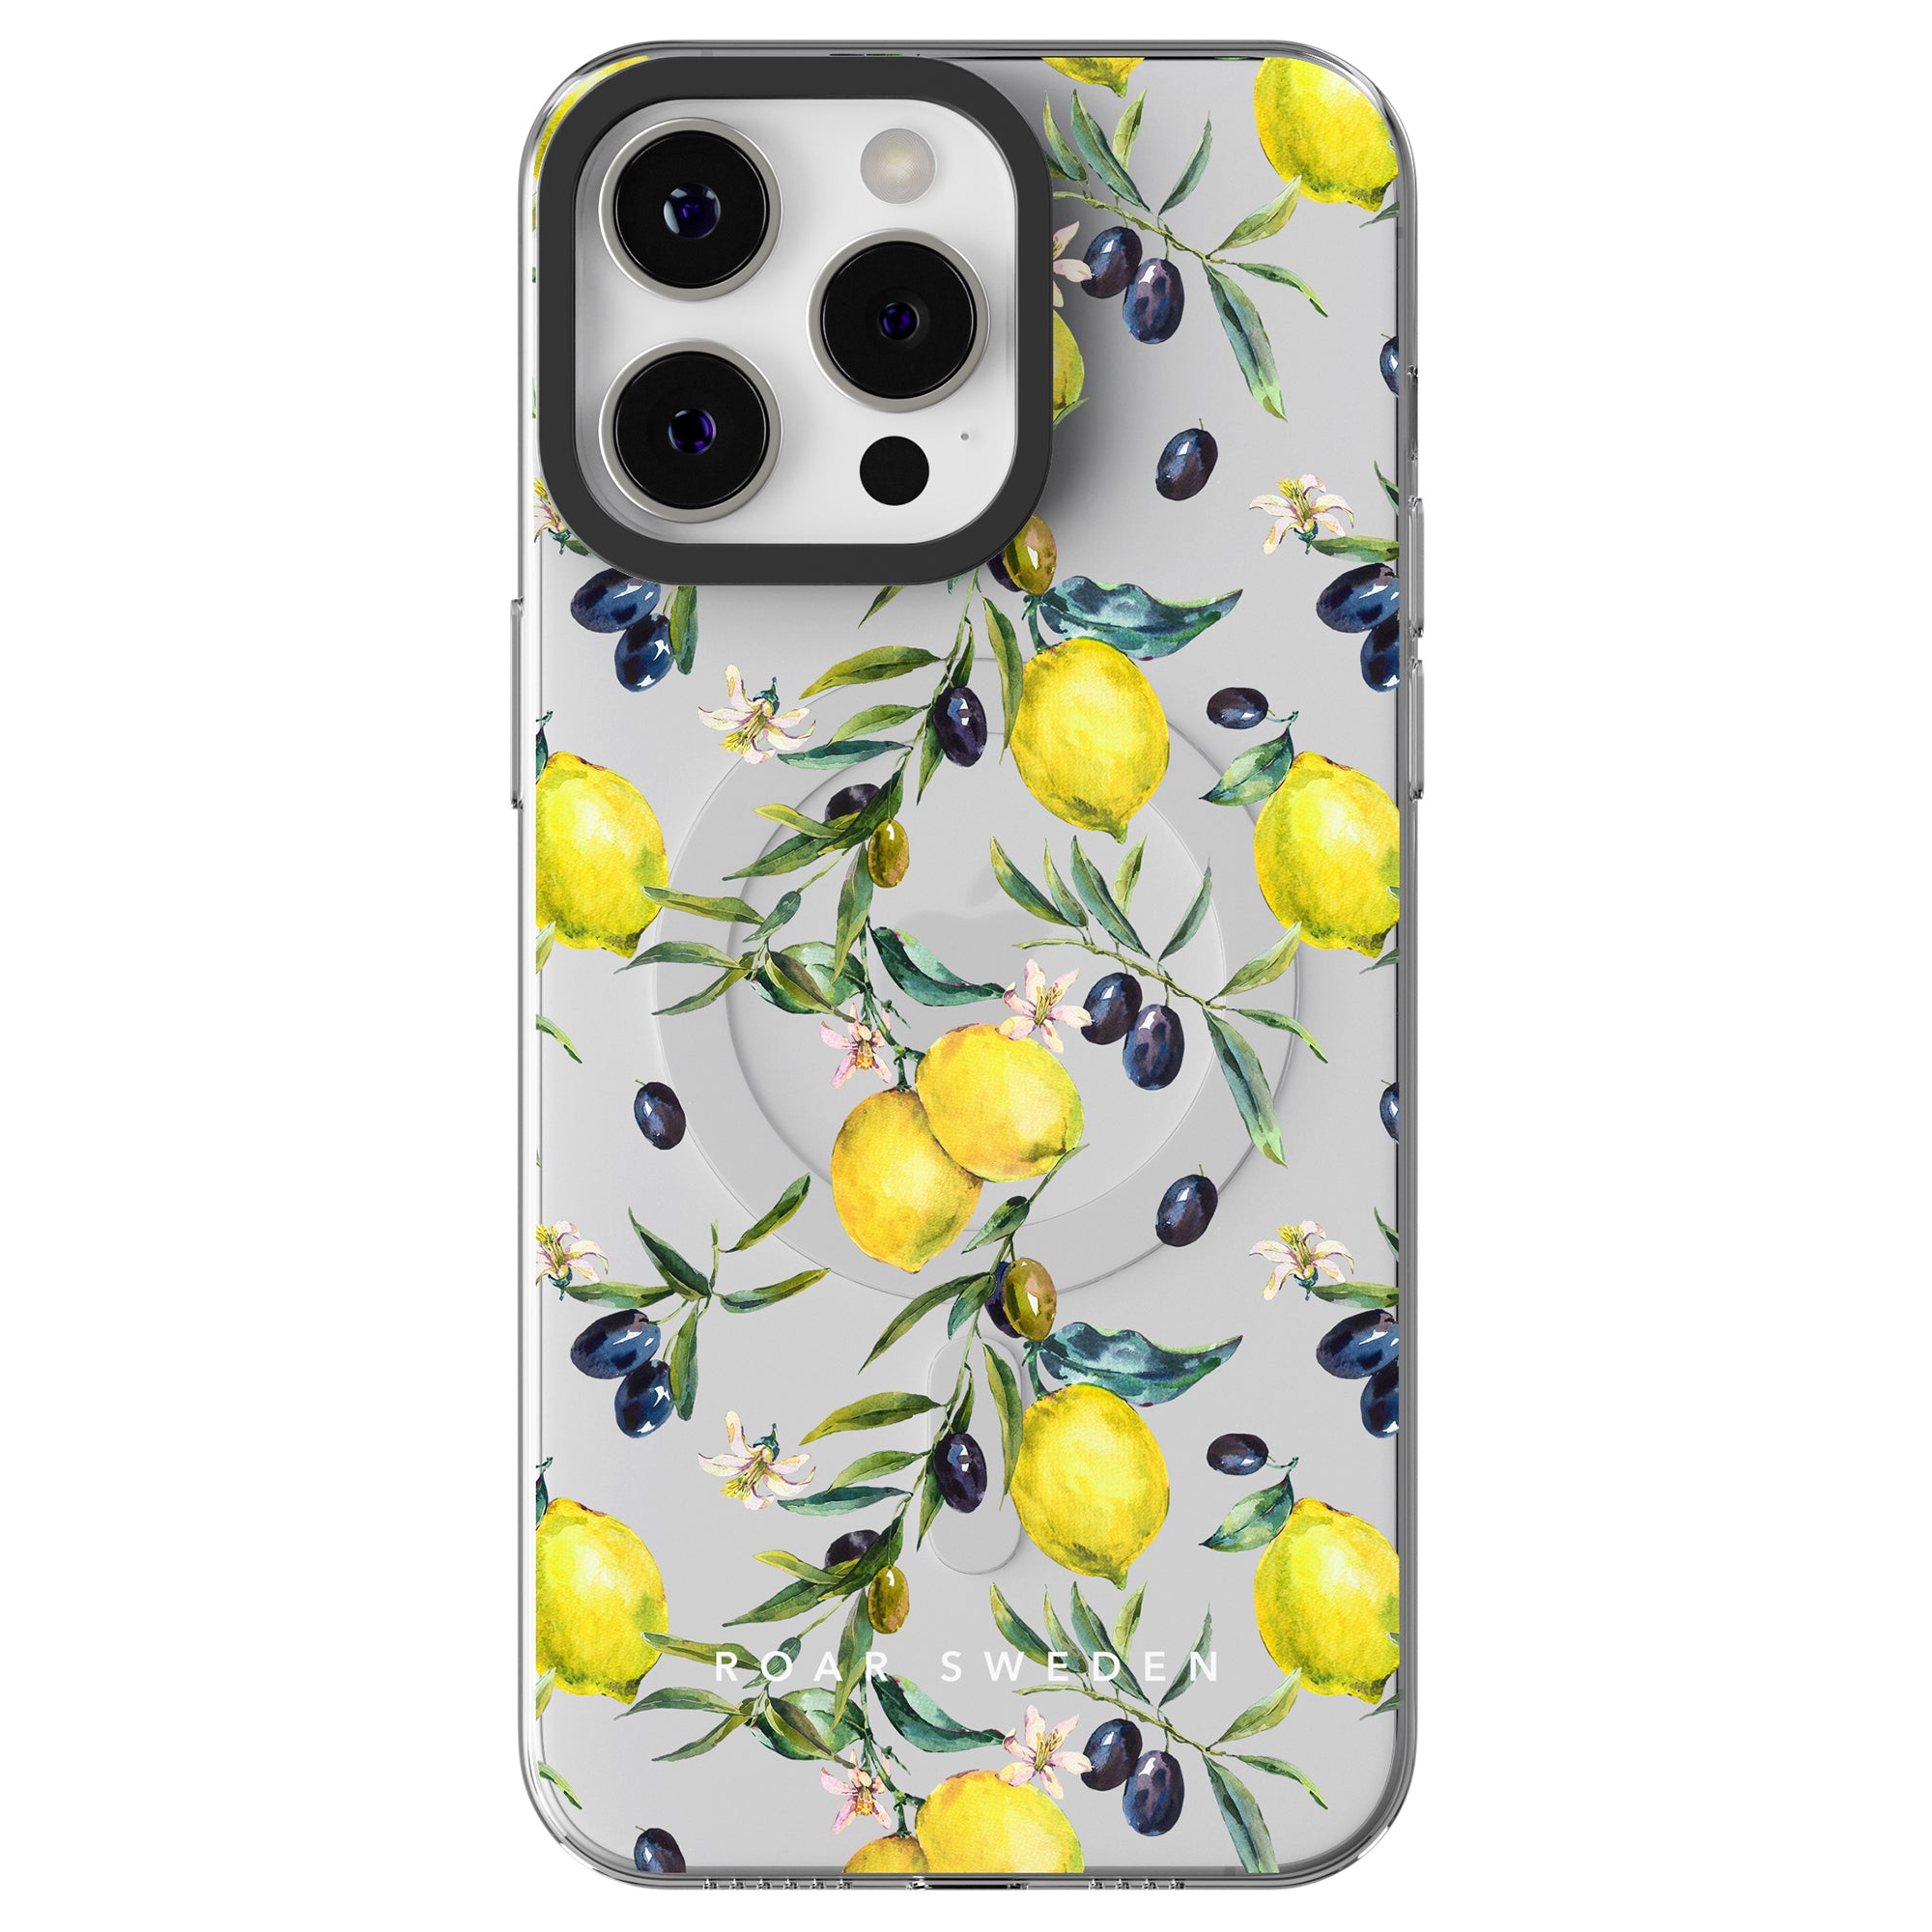 Lemon Garden - MagSafe Case, part of the Lemon Collection, featuring illustrations of lemons, olives, and leaves.